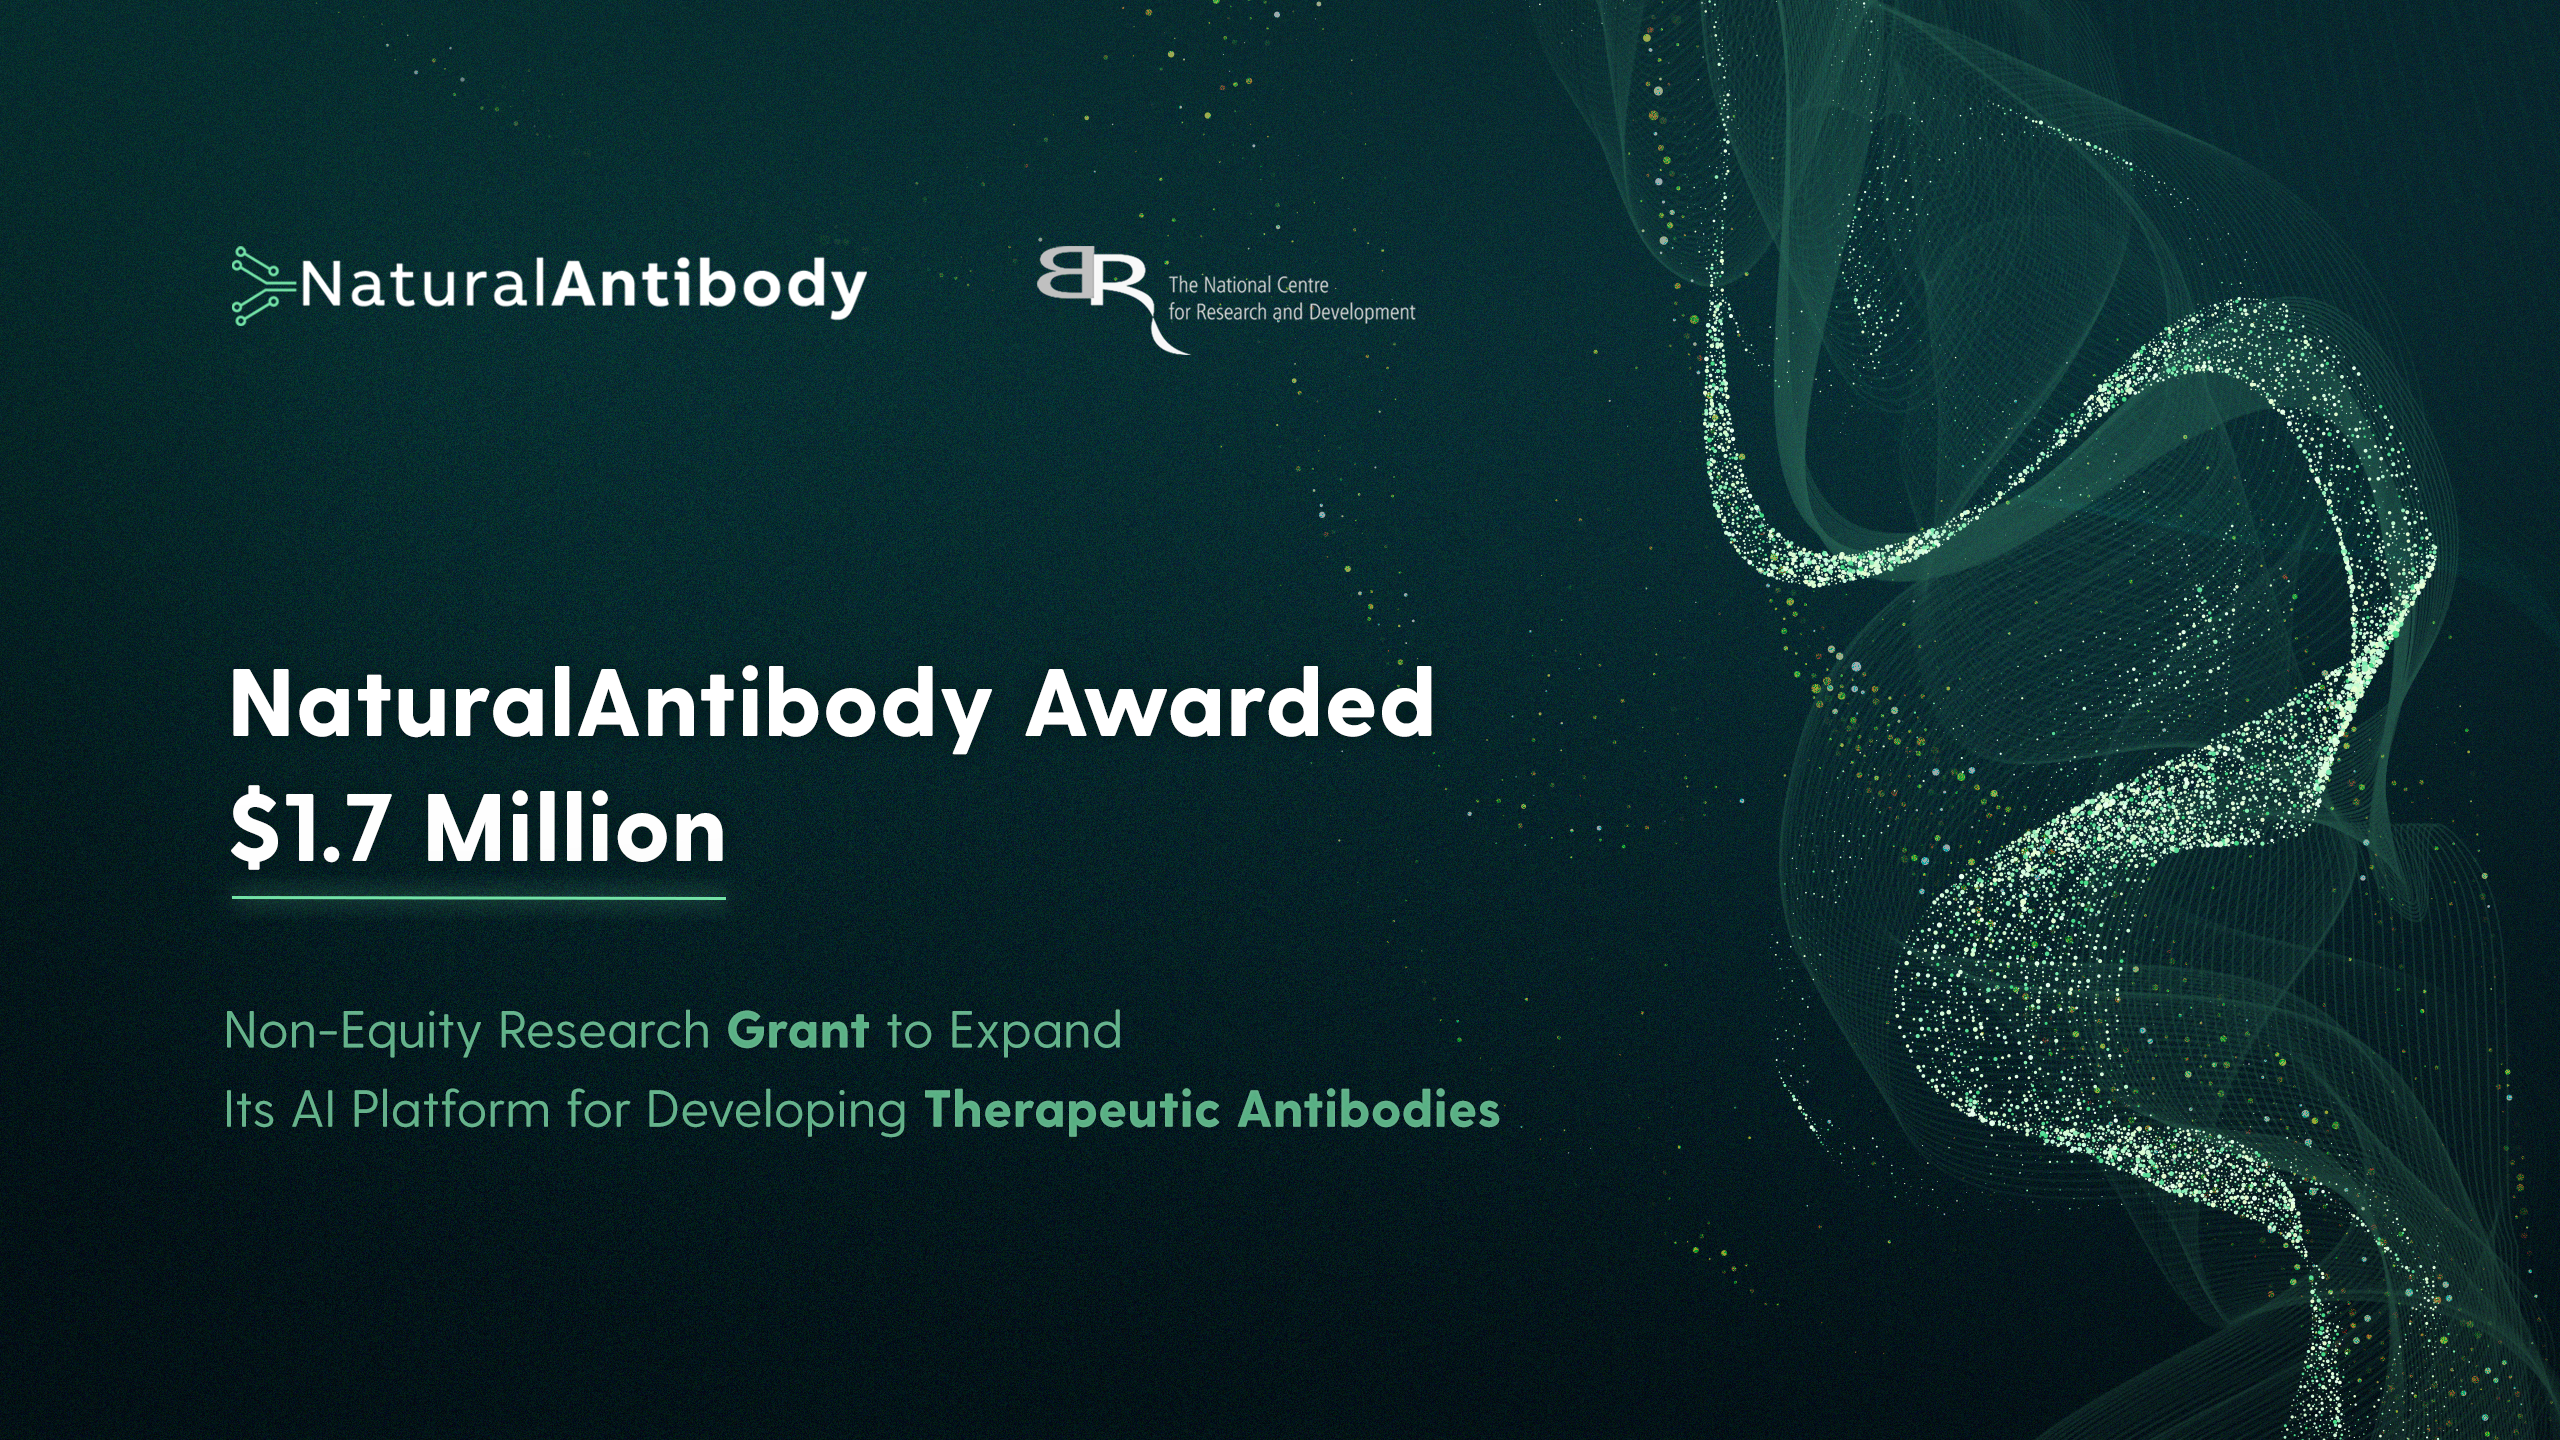 NaturalAntibody Awarded $1.7 Million Non-Equity Research Grant to Expand Its AI Platform for Developing Therapeutic Antibodies